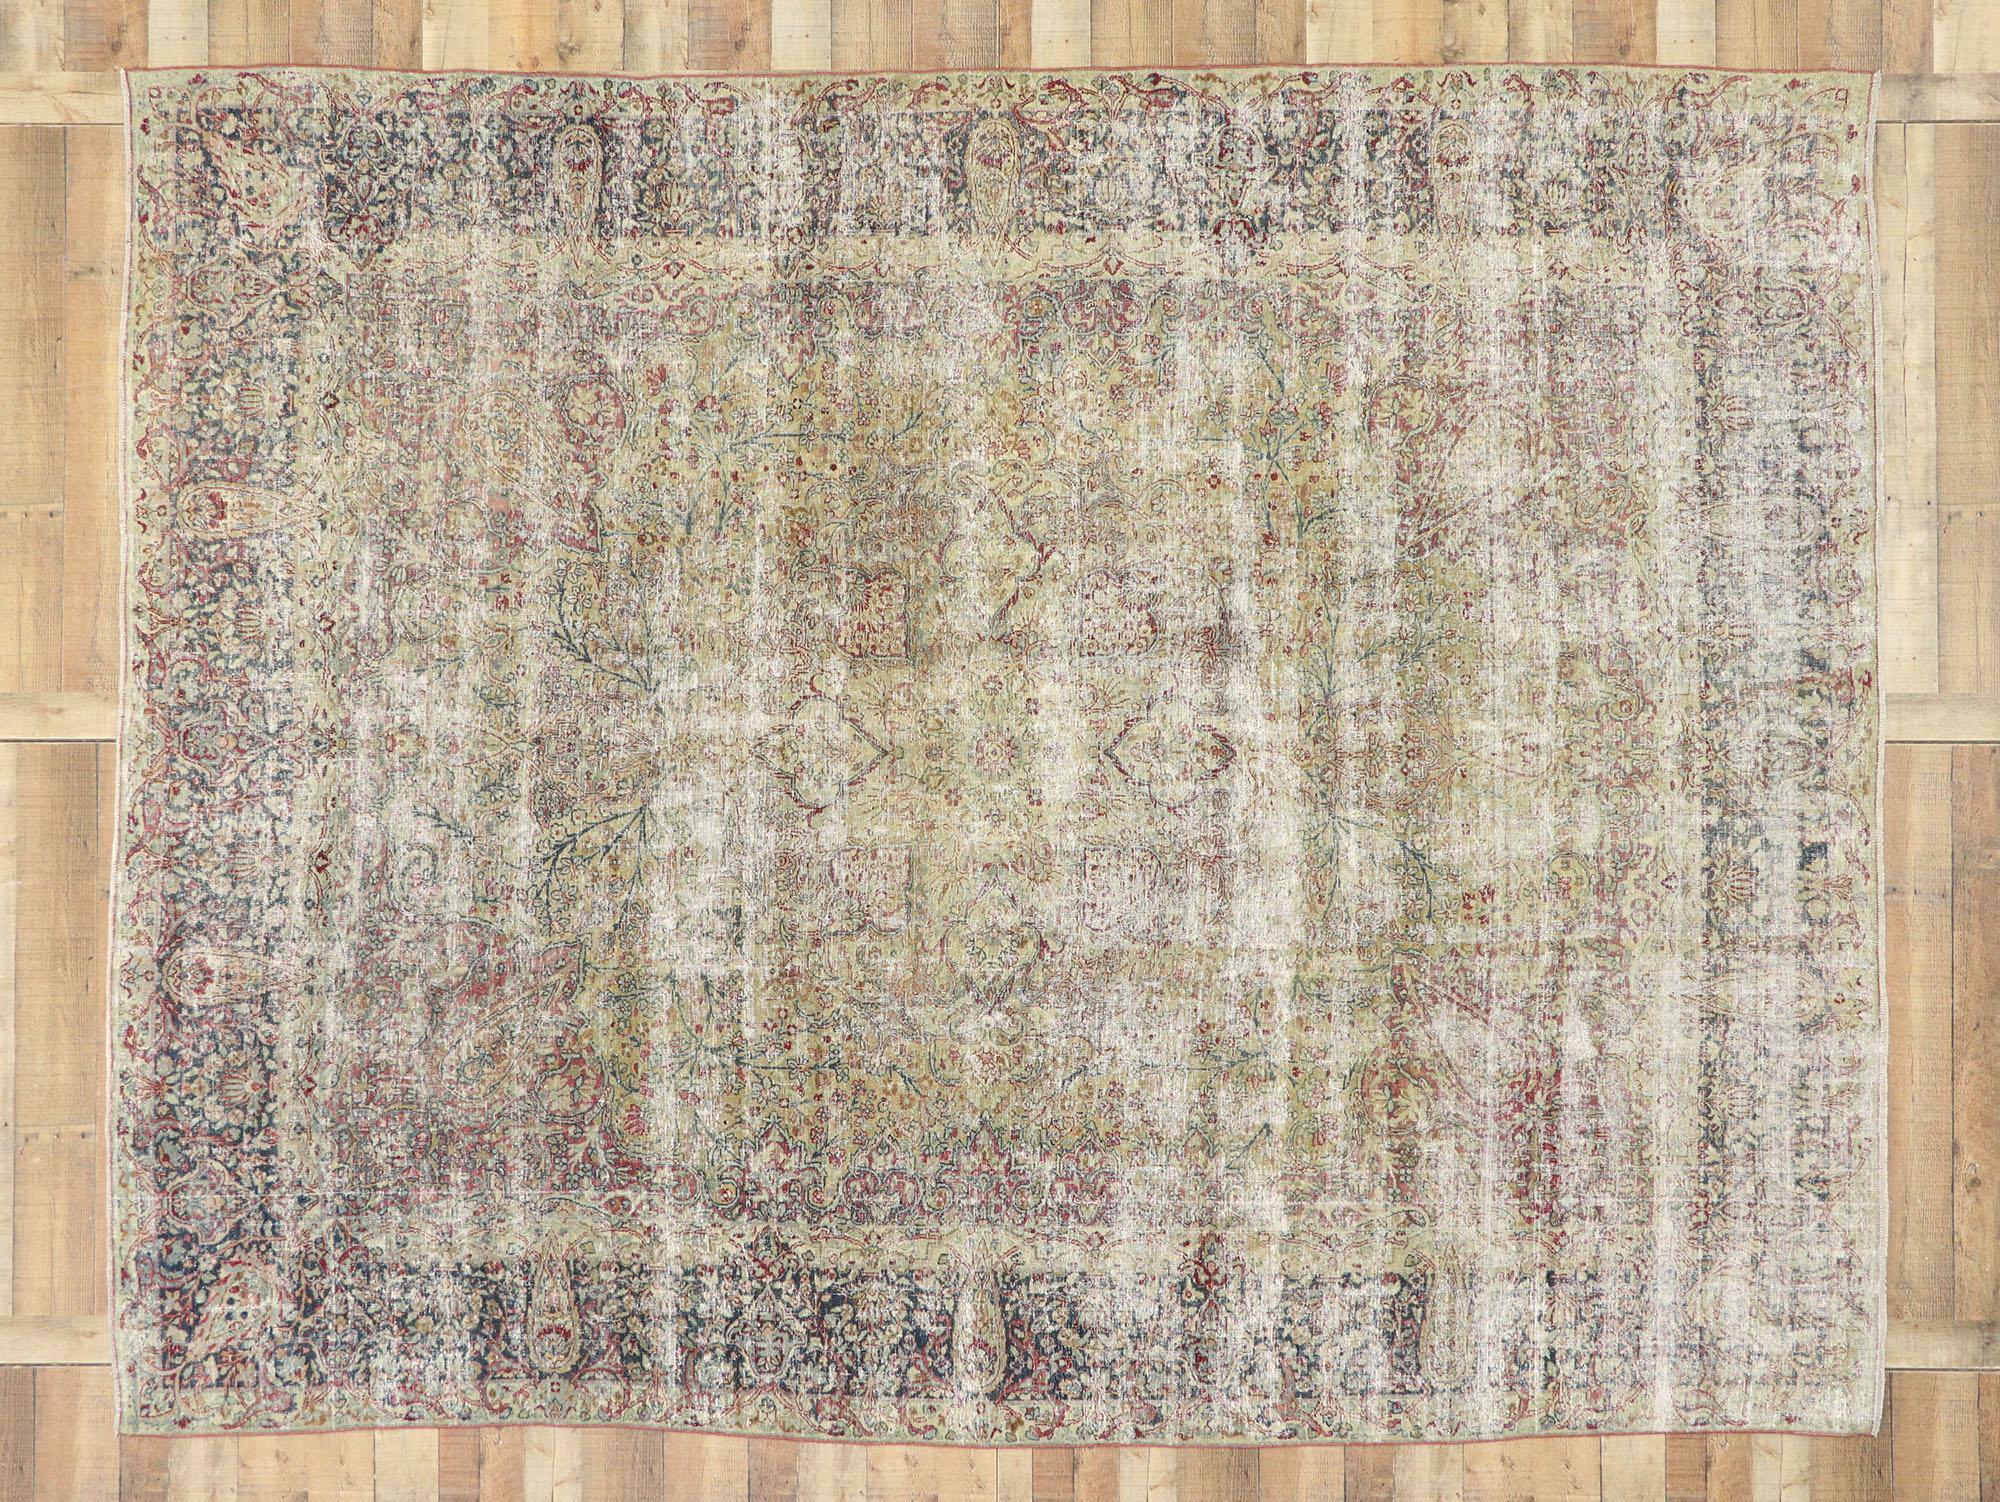 Distressed Antique Persian Kerman Rug with Modern Rustic English Cottage Style For Sale 1